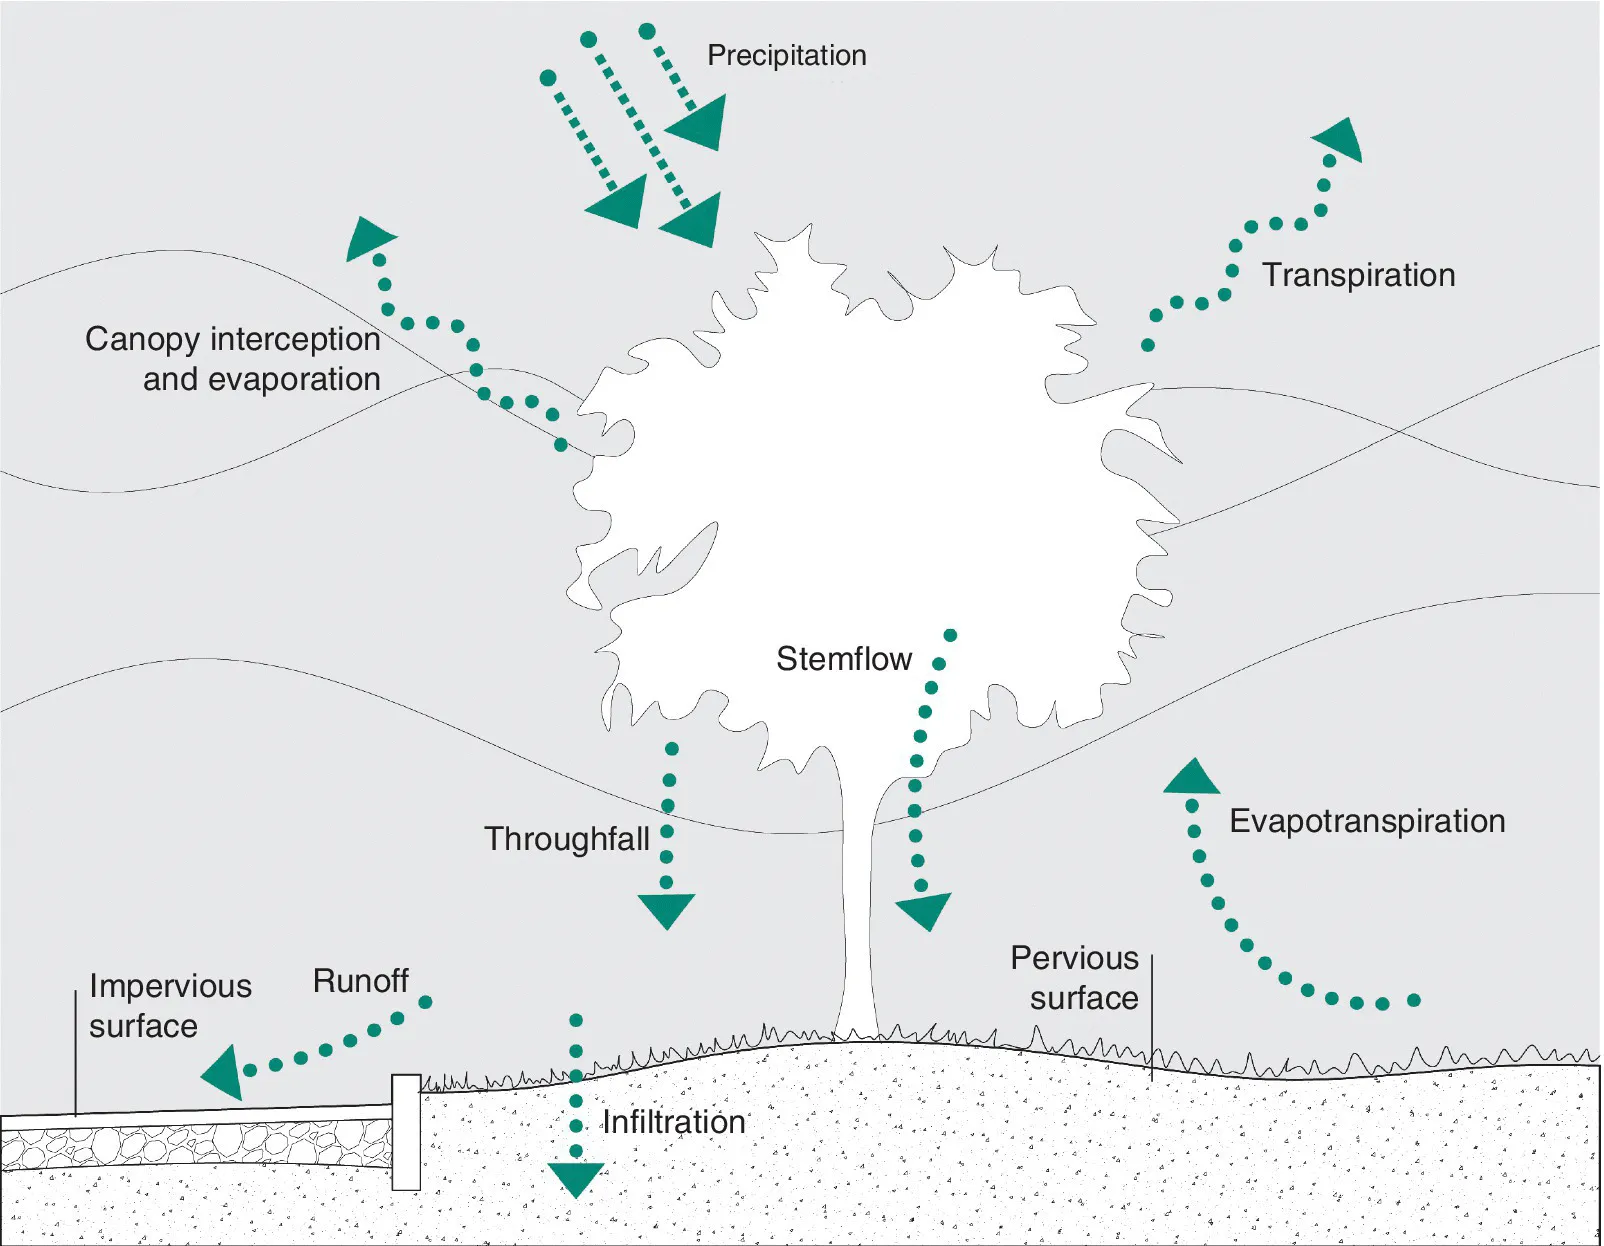 Schematic illustrating the role of vegetation in the natural hydrologic cycle, with arrows depicting precipitation, transpiration, evapotranspiration, stemflow, throughfall, infiltration, etc.